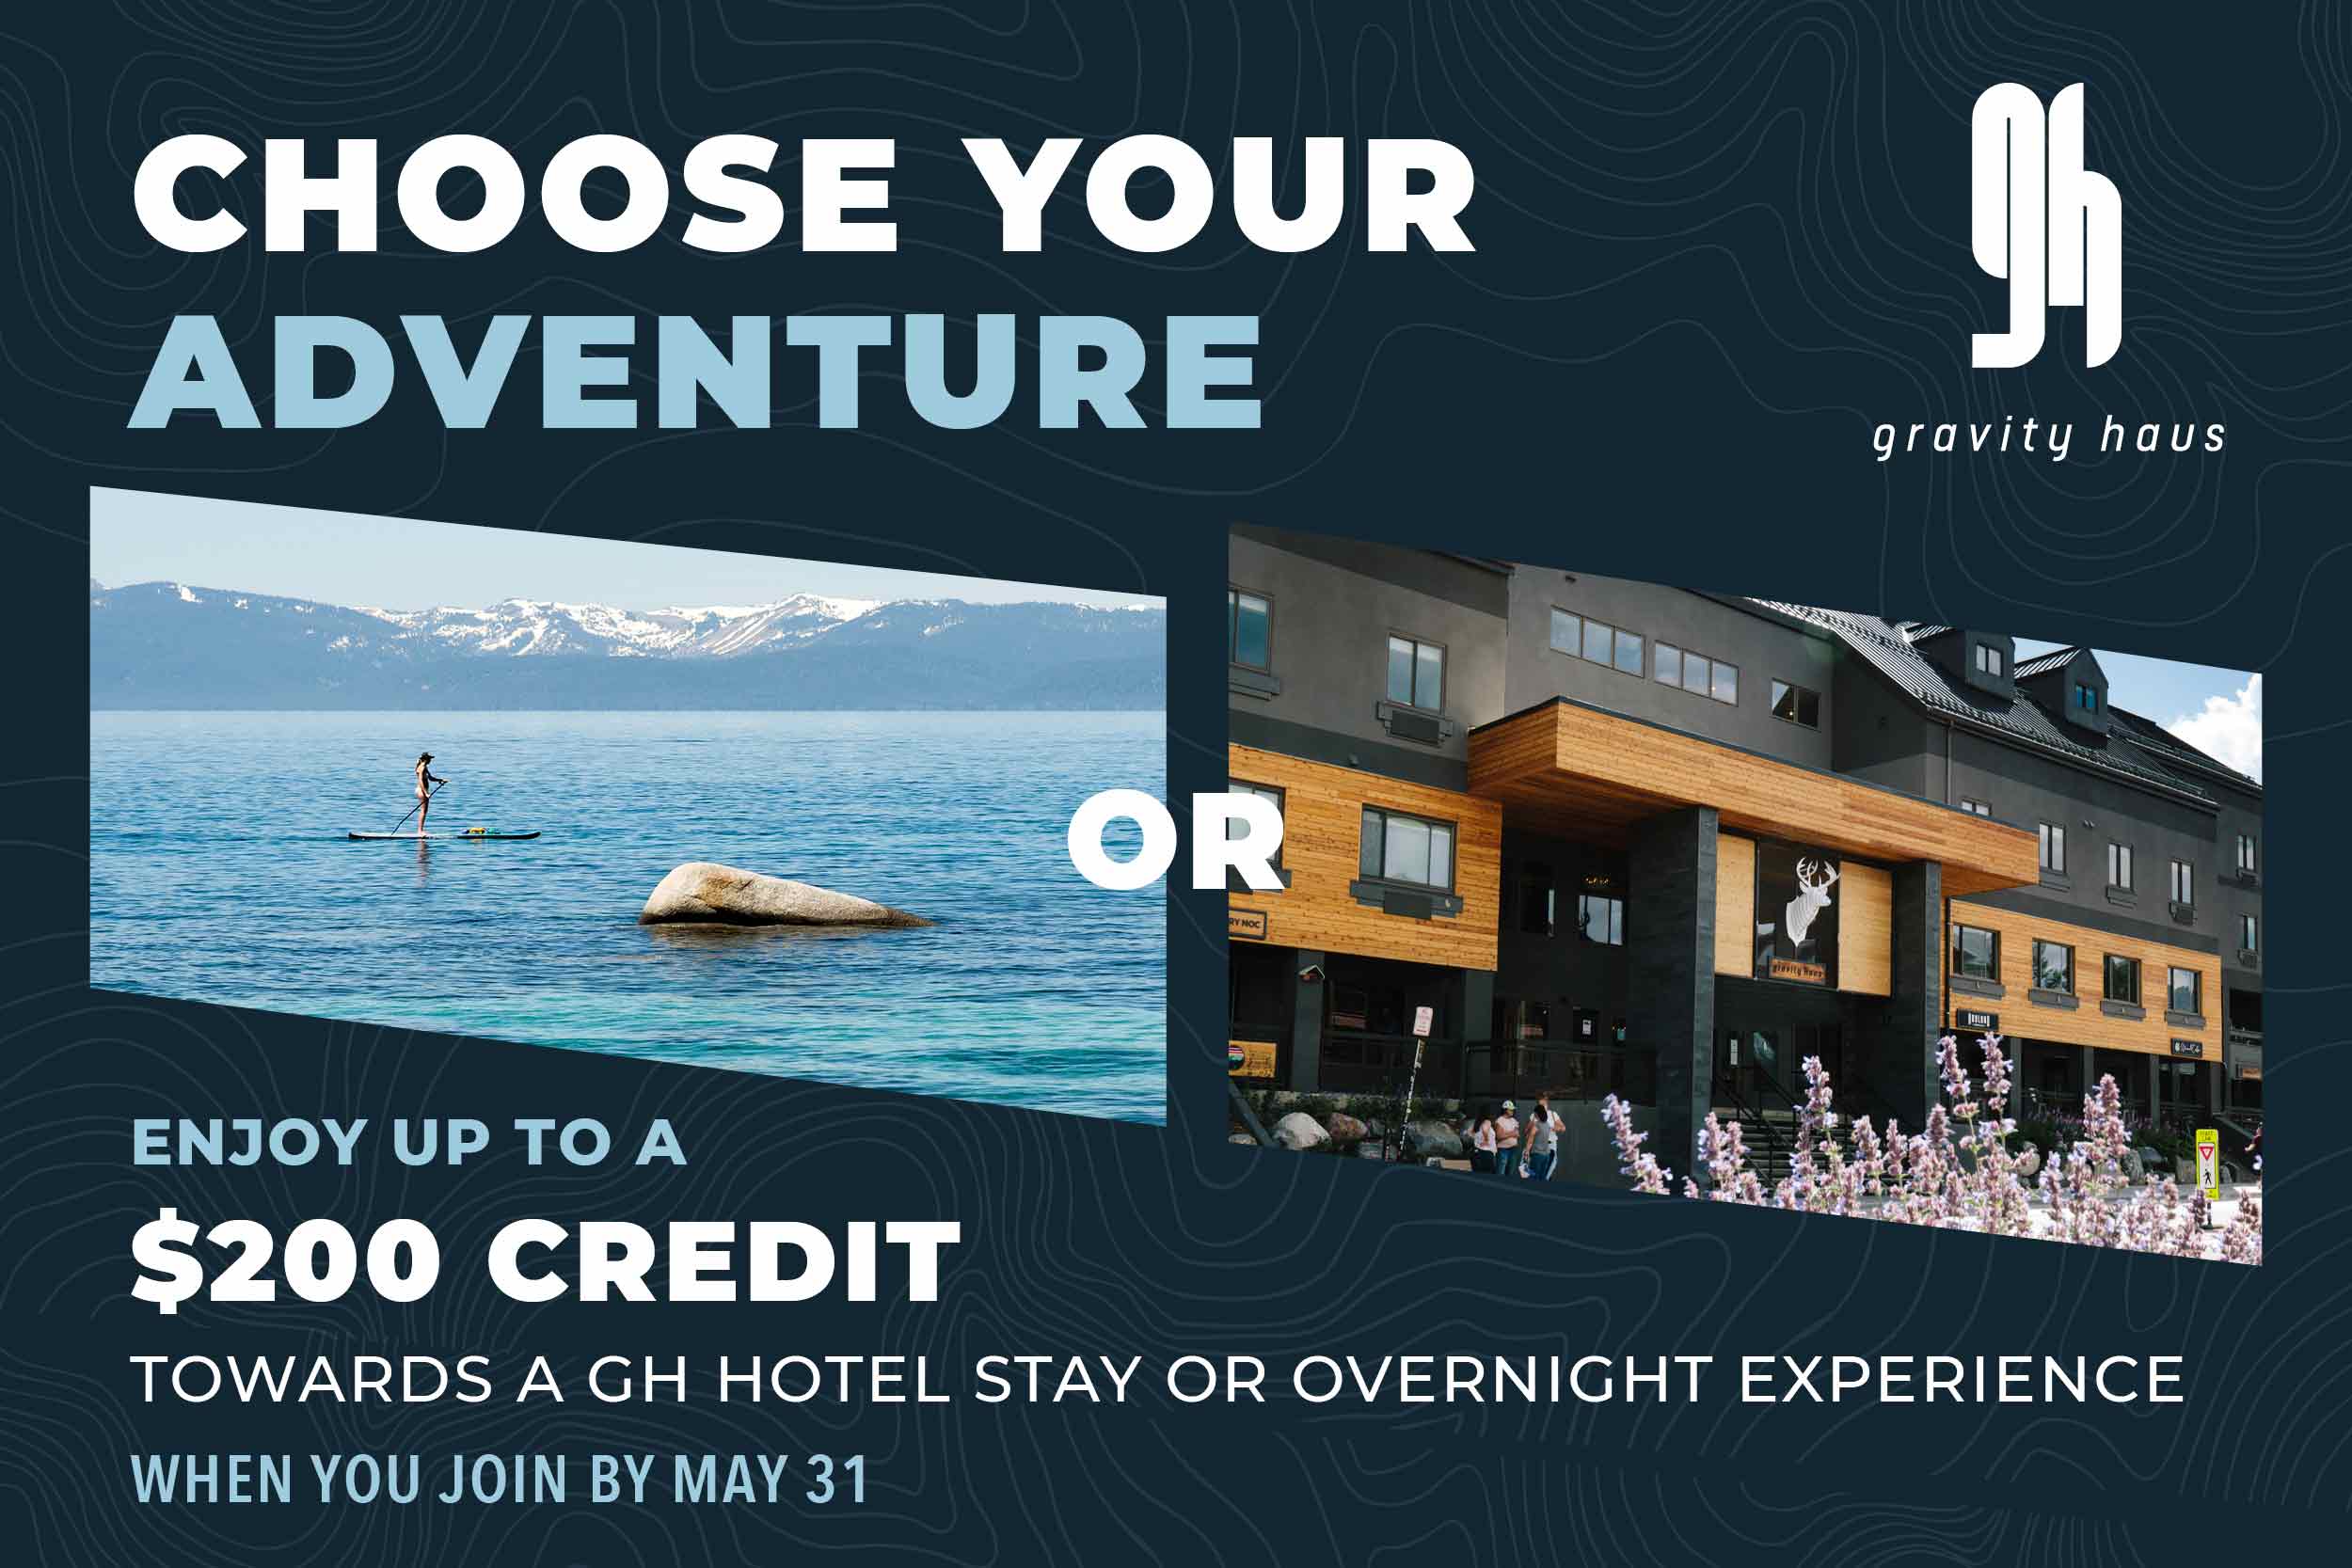 Enjoy up to a $200 credit toward a gravity haus hotel stay or overnight experience.